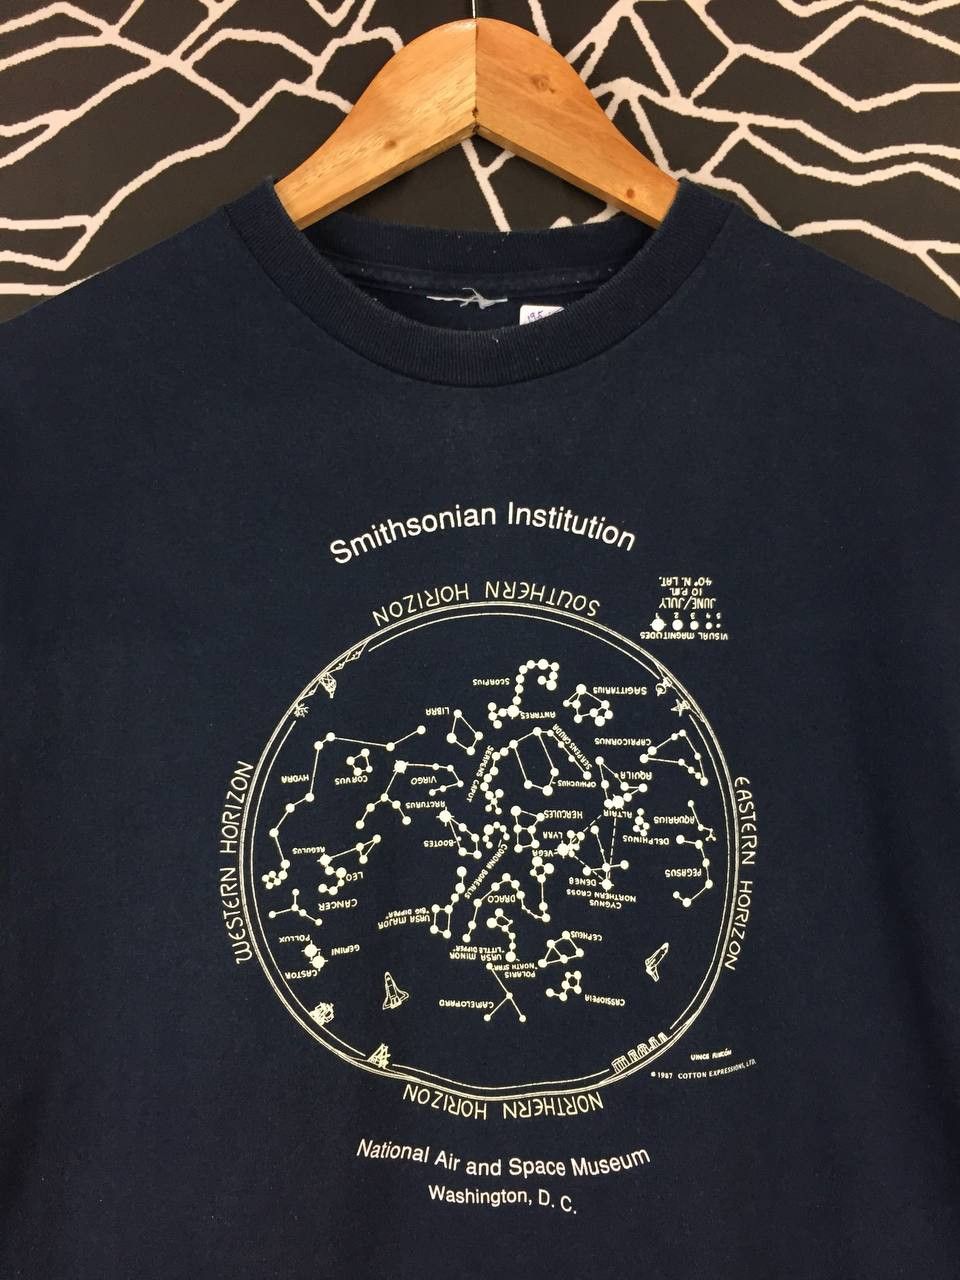 Vintage Vtg Smithsonian Institution National Air & Space Museum Tee Size US M / EU 48-50 / 2 - 3 Thumbnail